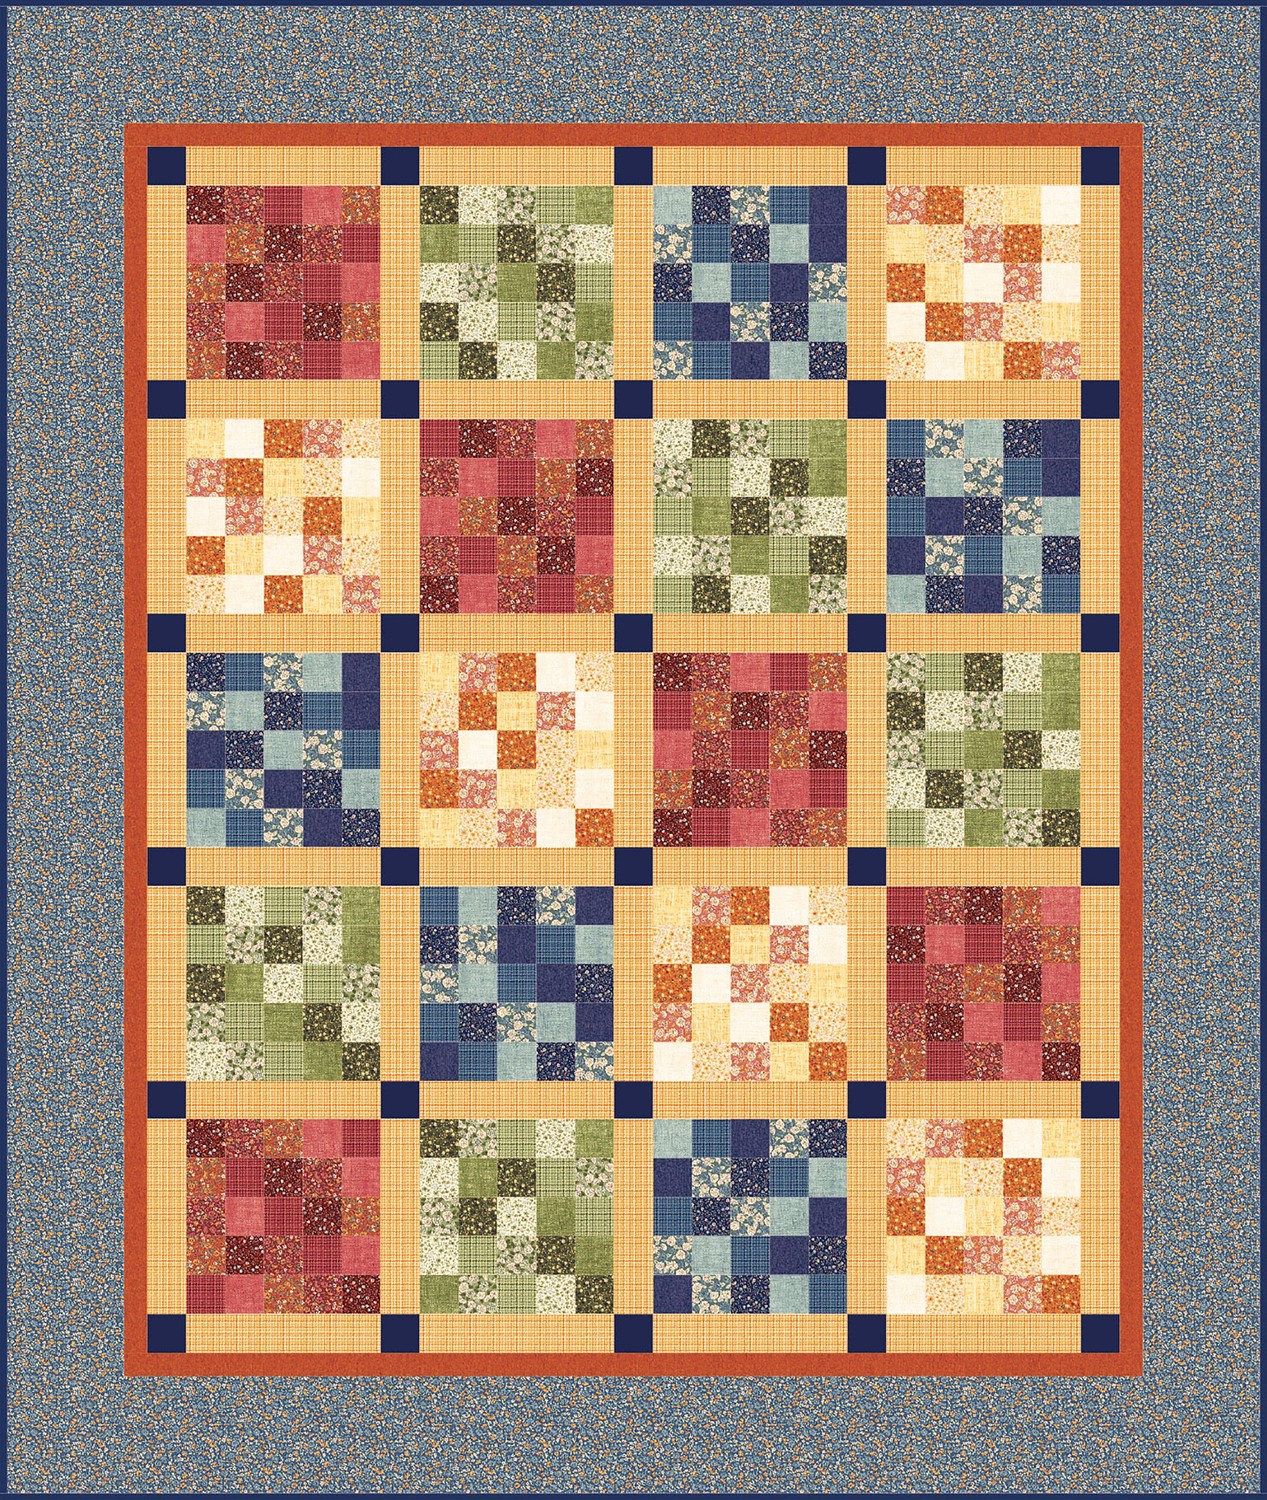 You'll Go Gaga Full Quilt Kit by Bean Counter Quilts, LLC